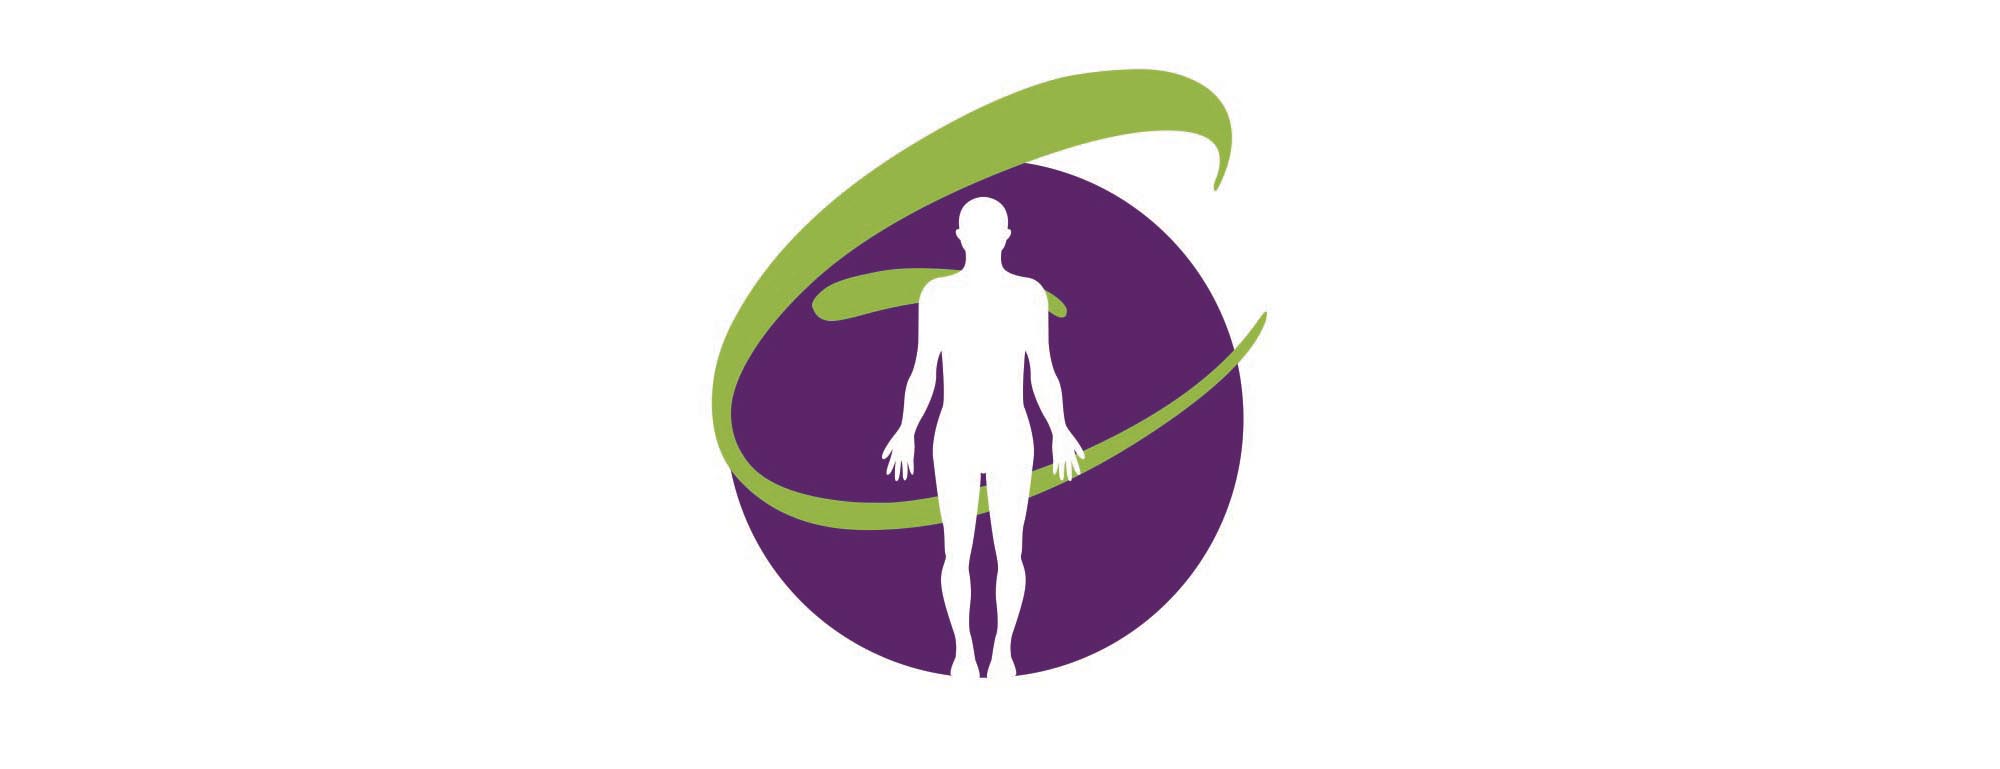 exemplar physical therapy chicago service icon image